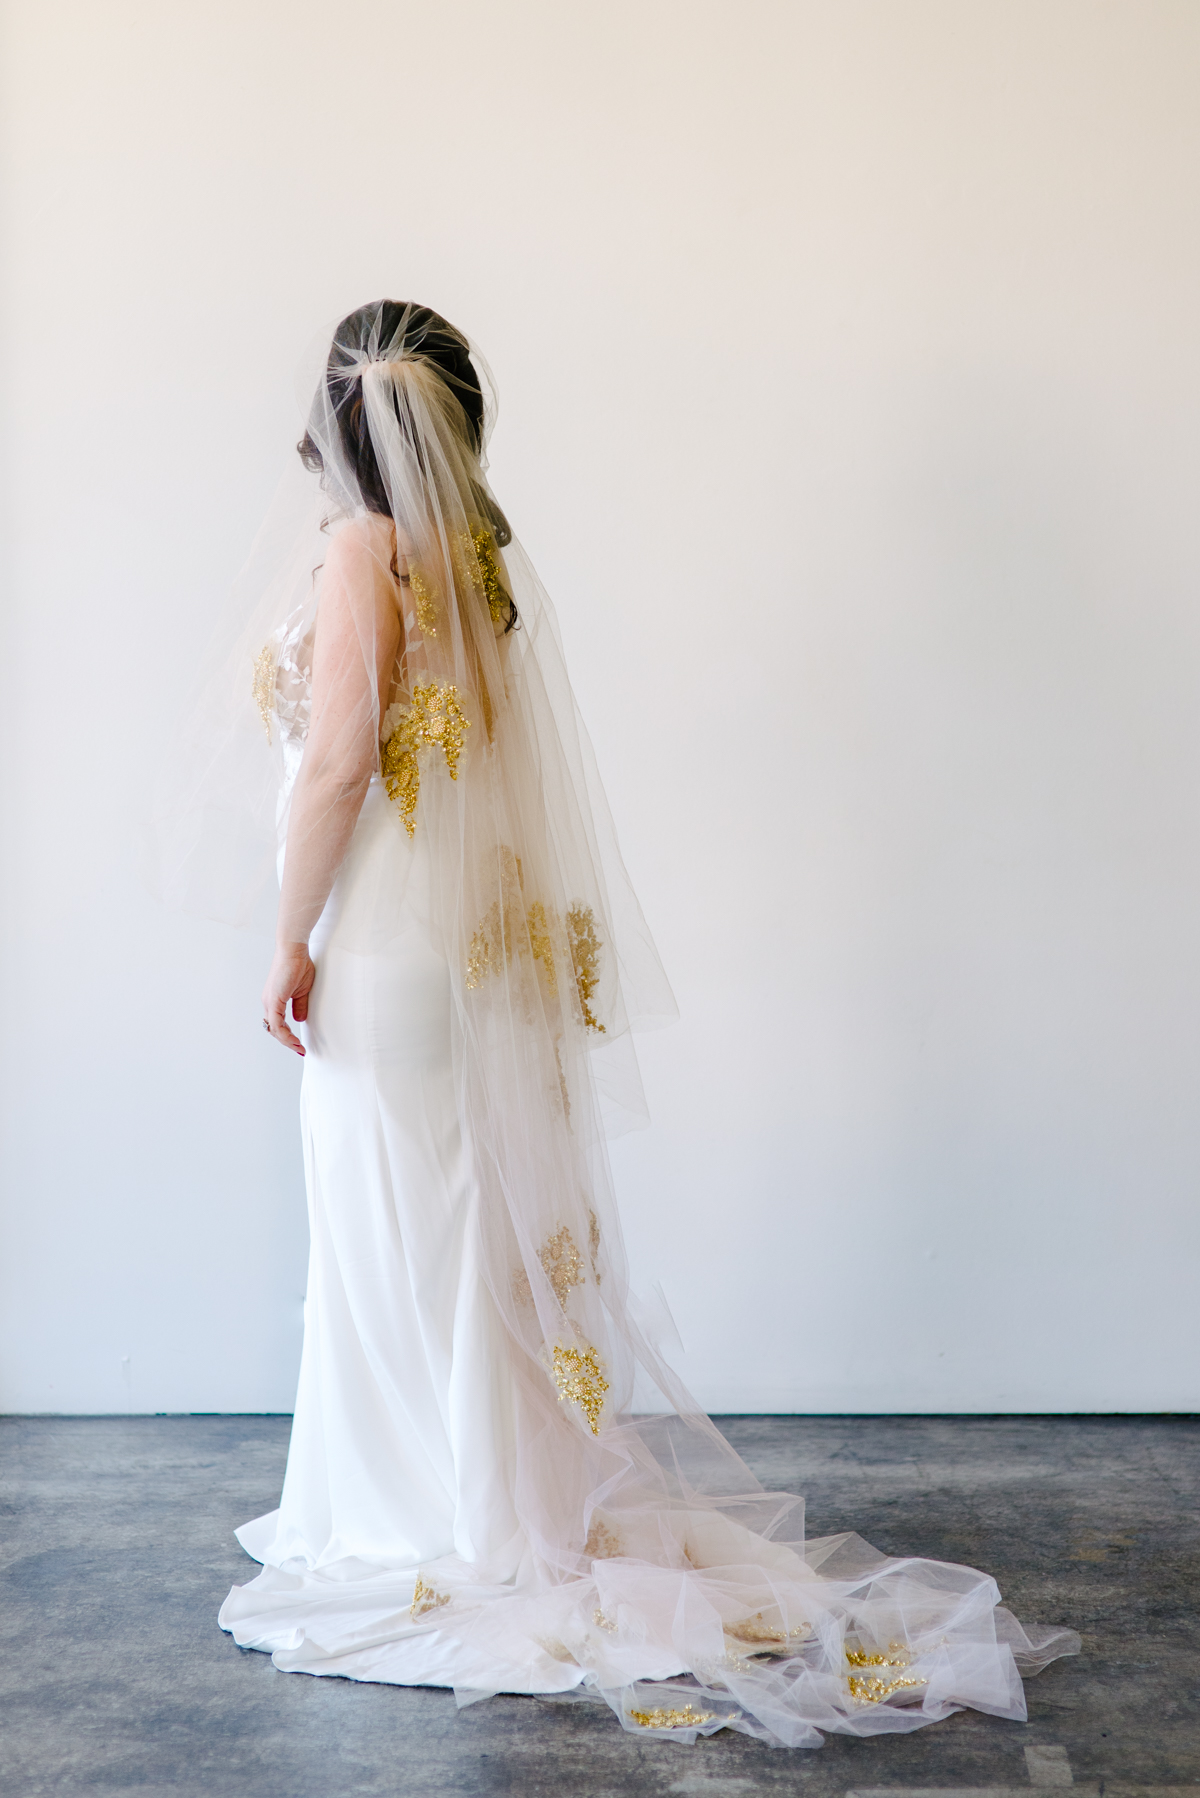 A full body reverse view of a woman wearing a long wedding veil with gold accents